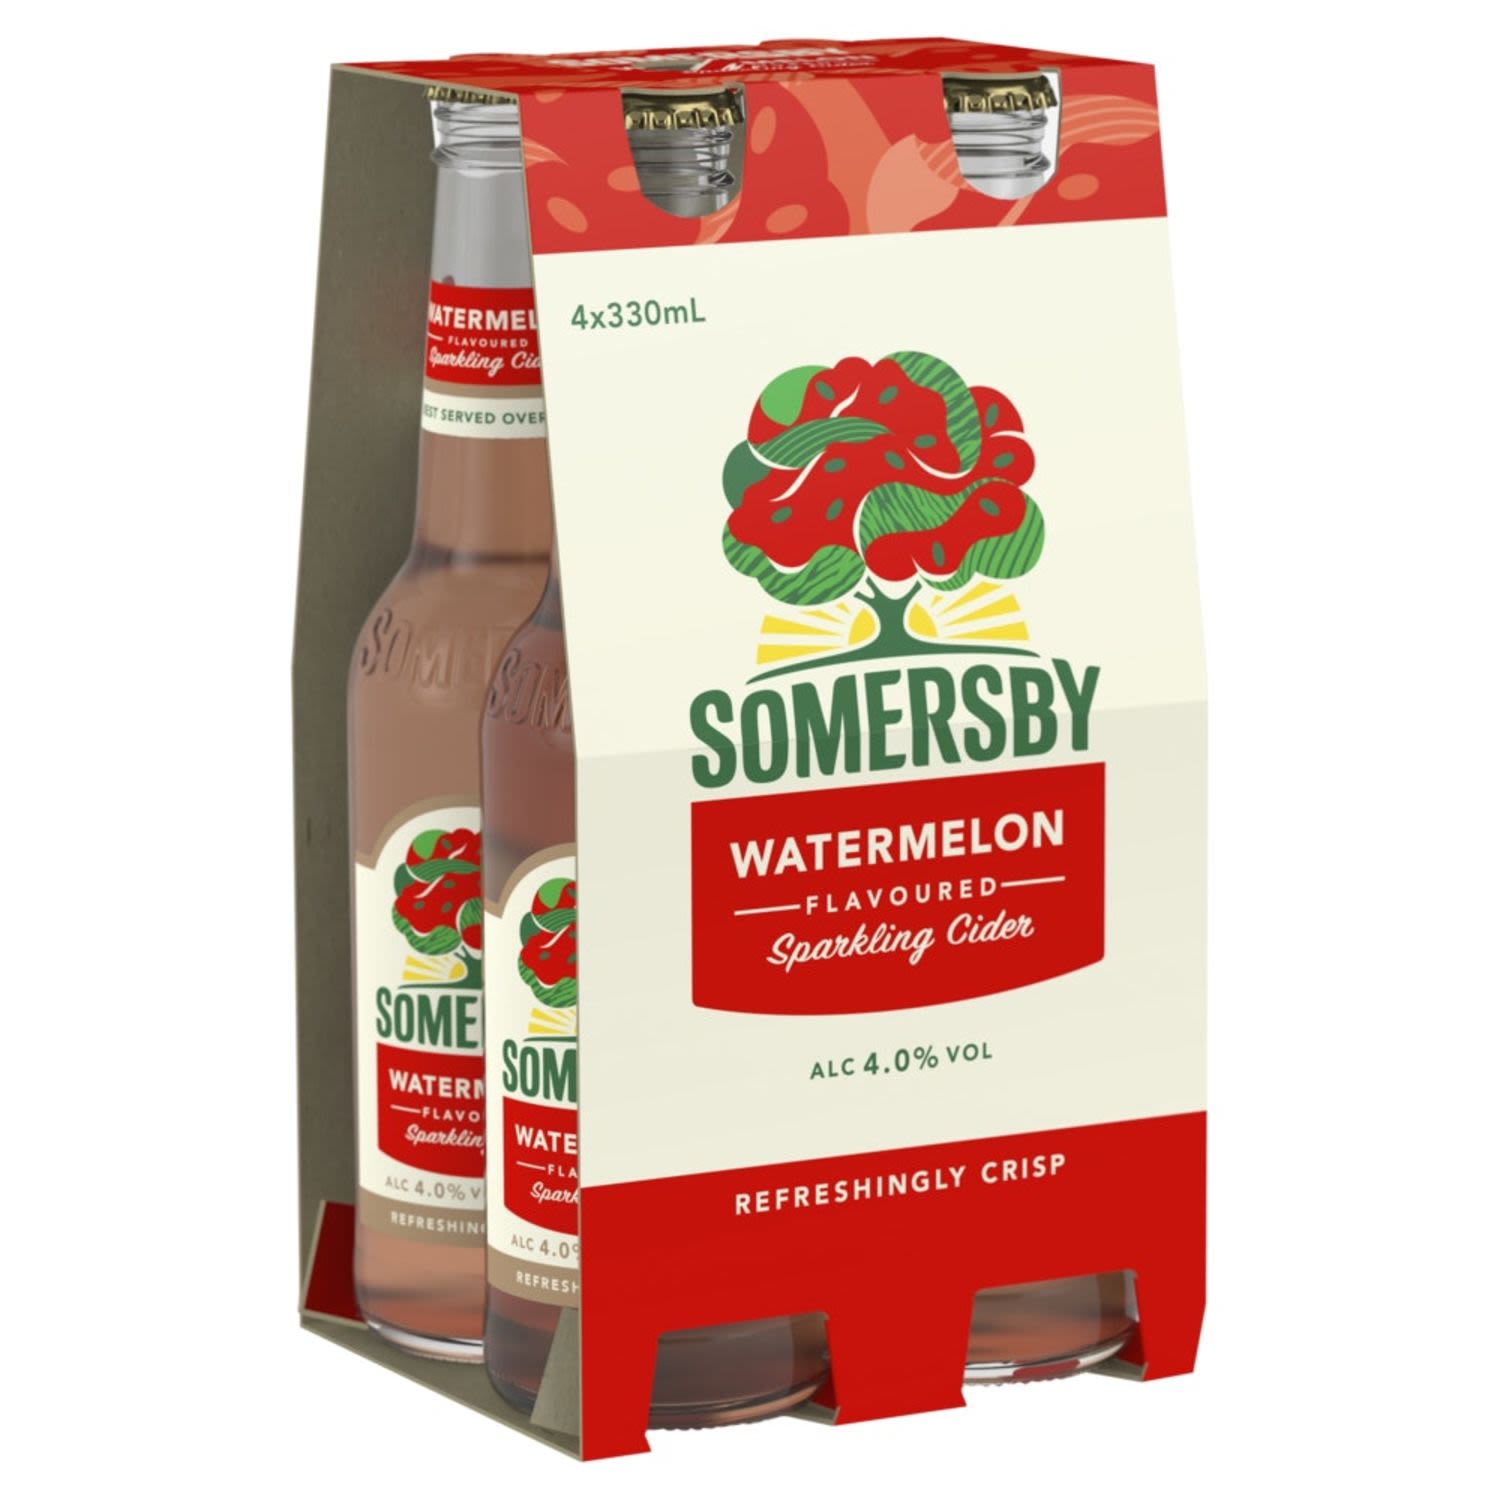 This easy to drink Somersby cider gives you a refreshing and fruity taste so you feel it's summer right away. Best served over ice...Enjoy!<br /> <br />Alcohol Volume: 4.00%<br /><br />Pack Format: 4 Pack<br /><br />Standard Drinks: 1</br /><br />Pack Type: Bottle<br /><br />Country of Origin: Australia<br />